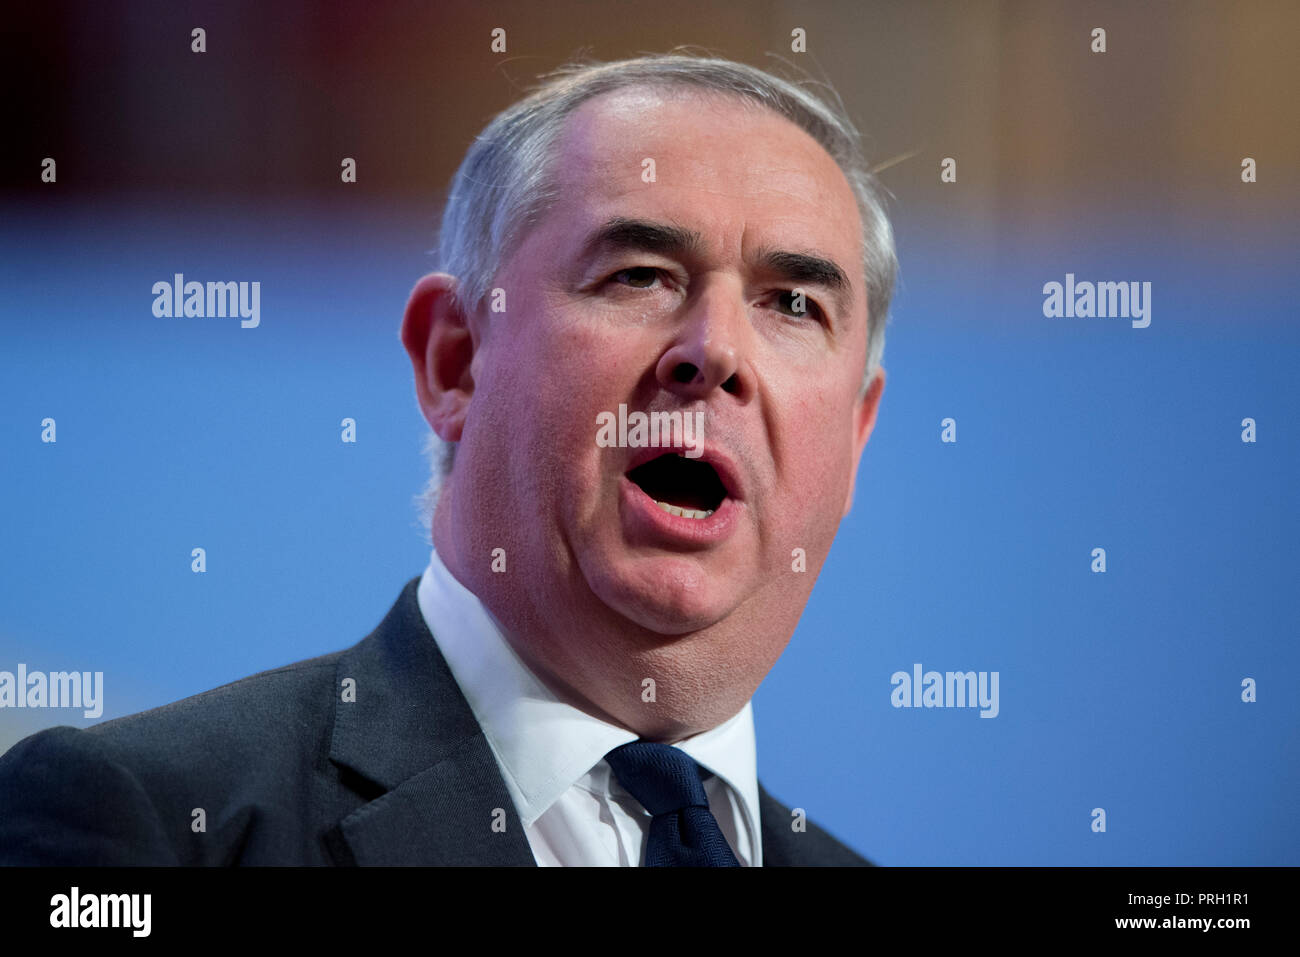 Birmingham, UK. 3rd October 2018. Geoffrey Cox MP, The Attorney General, speaks at the Conservative Party Conference in Birmingham. © Russell Hart/Alamy Live News. Stock Photo